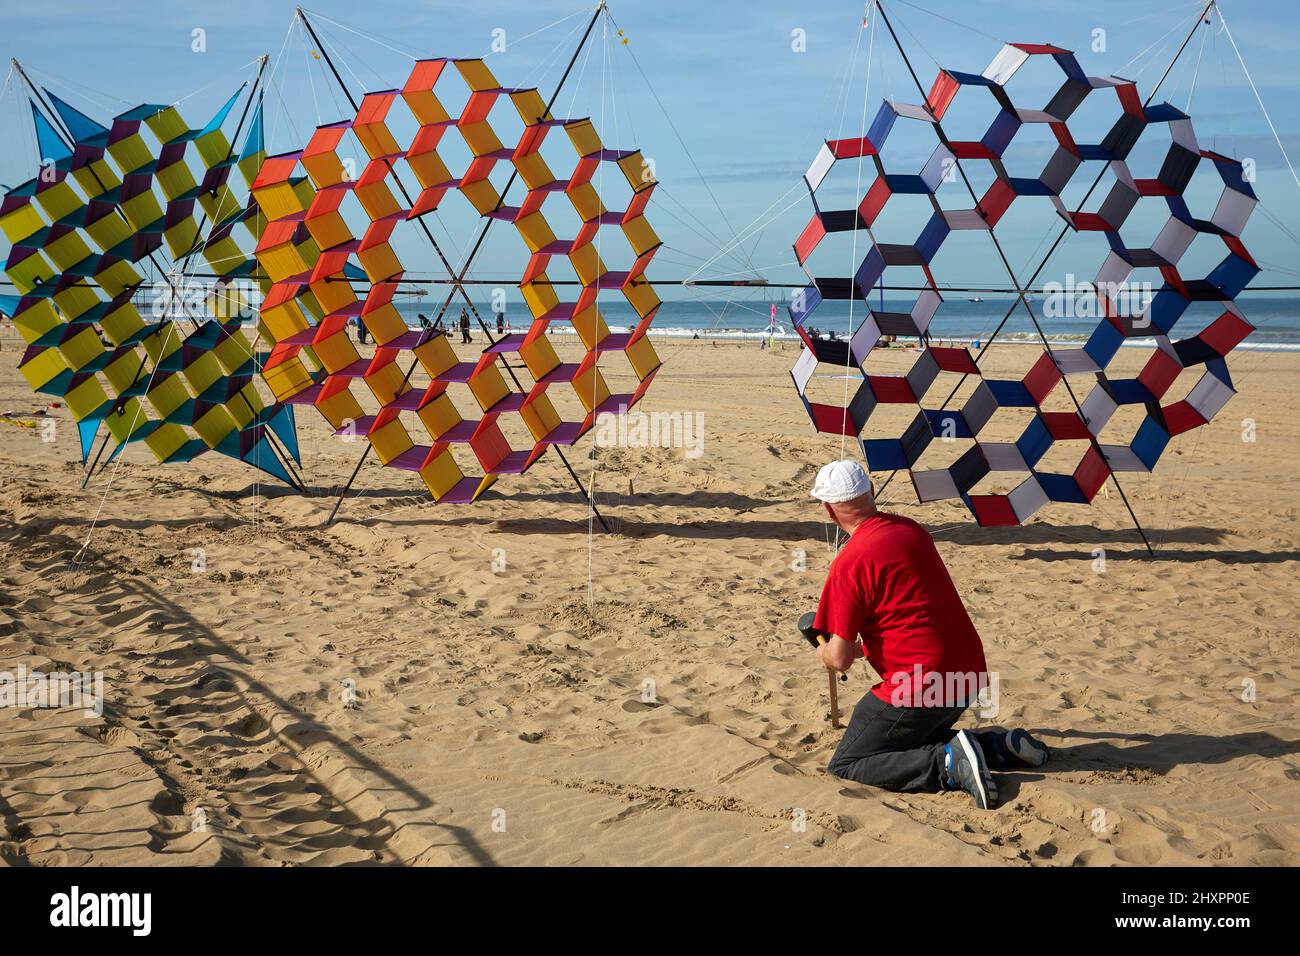 A participant holds their kites to the ground for later use during the exhibition Stock Photo